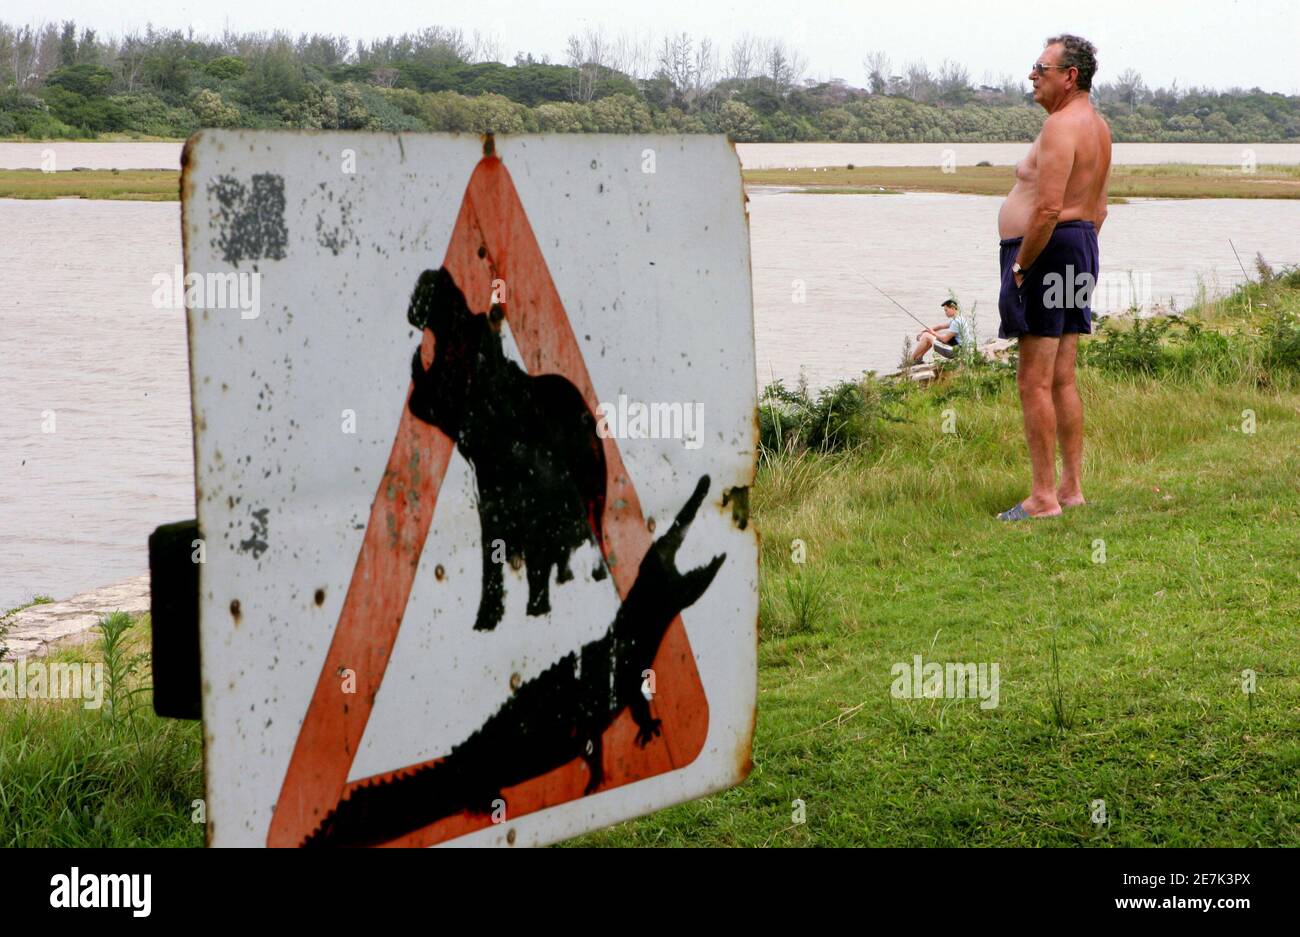 - PHOTO 12APR06 - A man looks out near a sign warning of the dangers of crocodiles and hippos on the banks of St Lucia estuary, about 200 km (124 miles) north of the coastal city of [Durban], South Africa April 12, 2006. Humans and big beasts have lived side by side in Africa since the dawn of our species, but rapid population growth is now stoking friction with dangerous animals, experts say. Photo taken April 12, 2006. Stock Photo